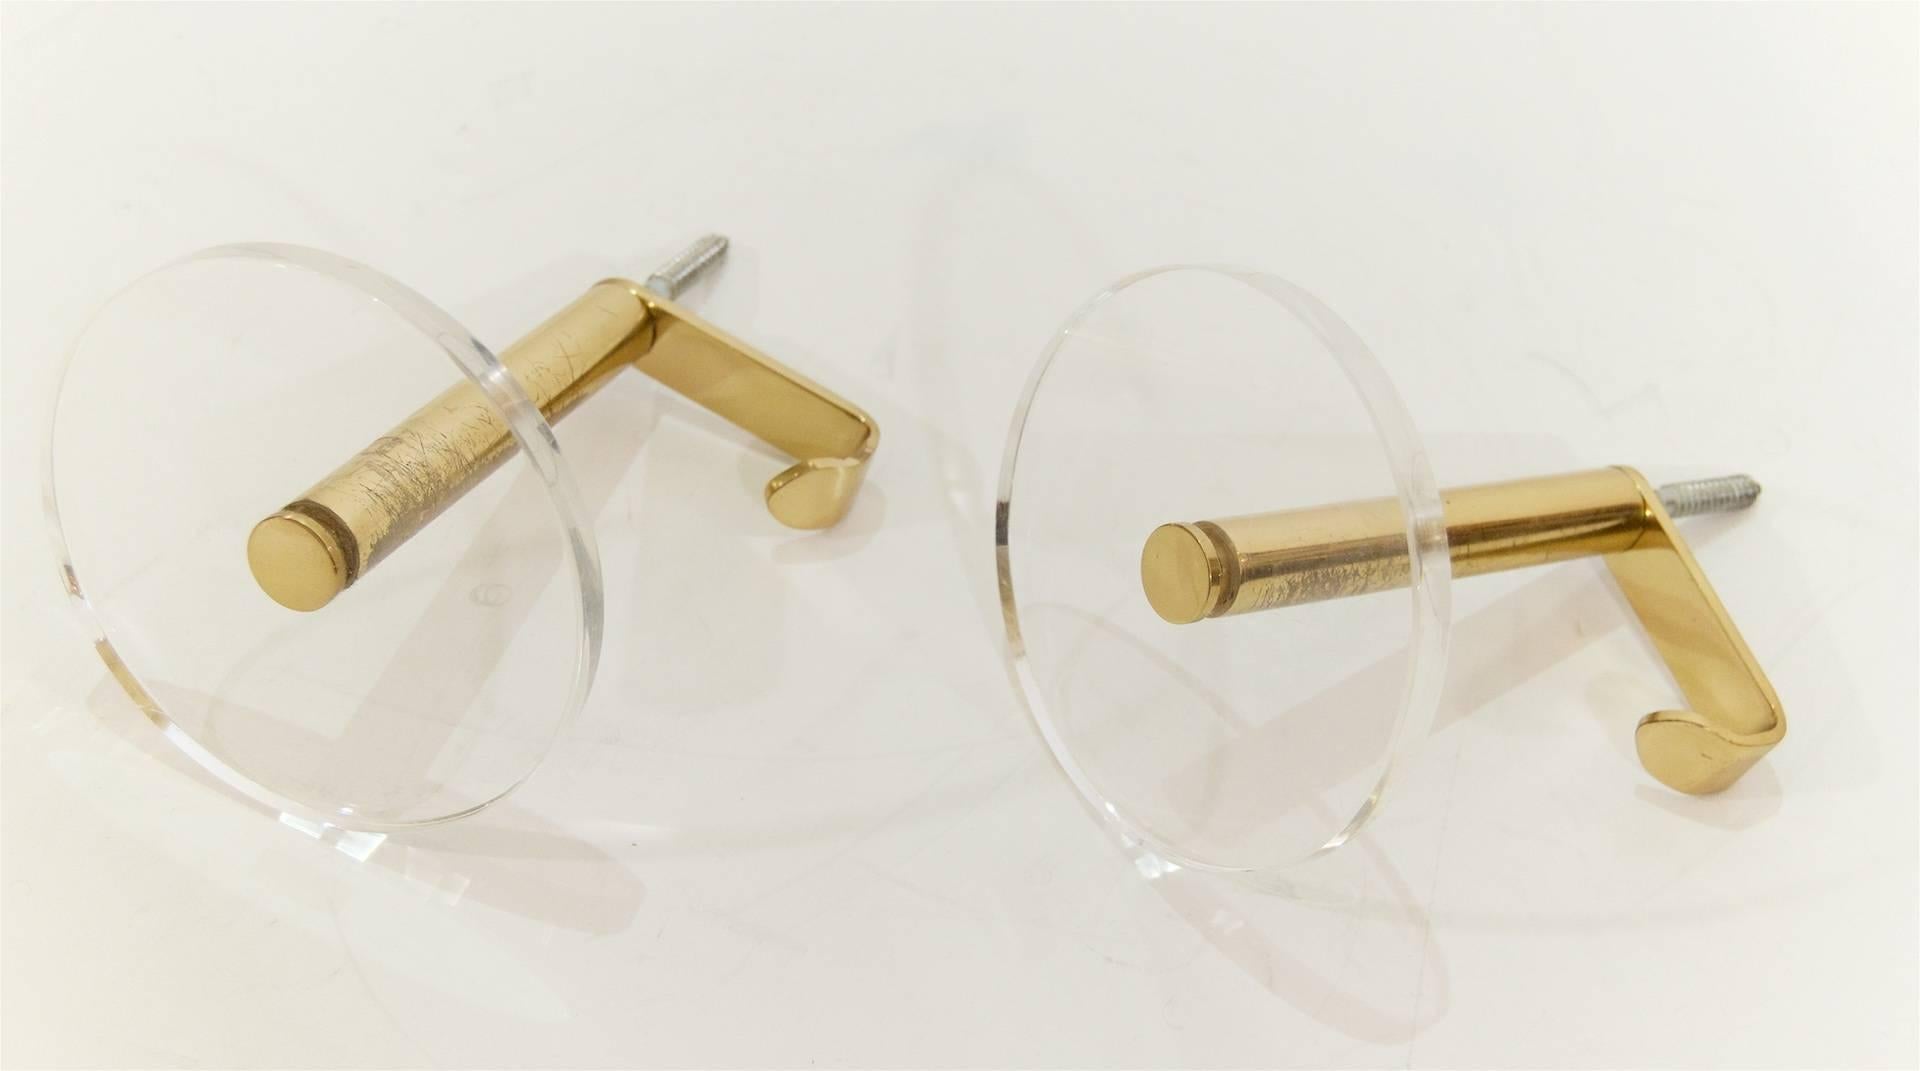 Pair of Minimalist brass coat hooks with Lucite disk accents.